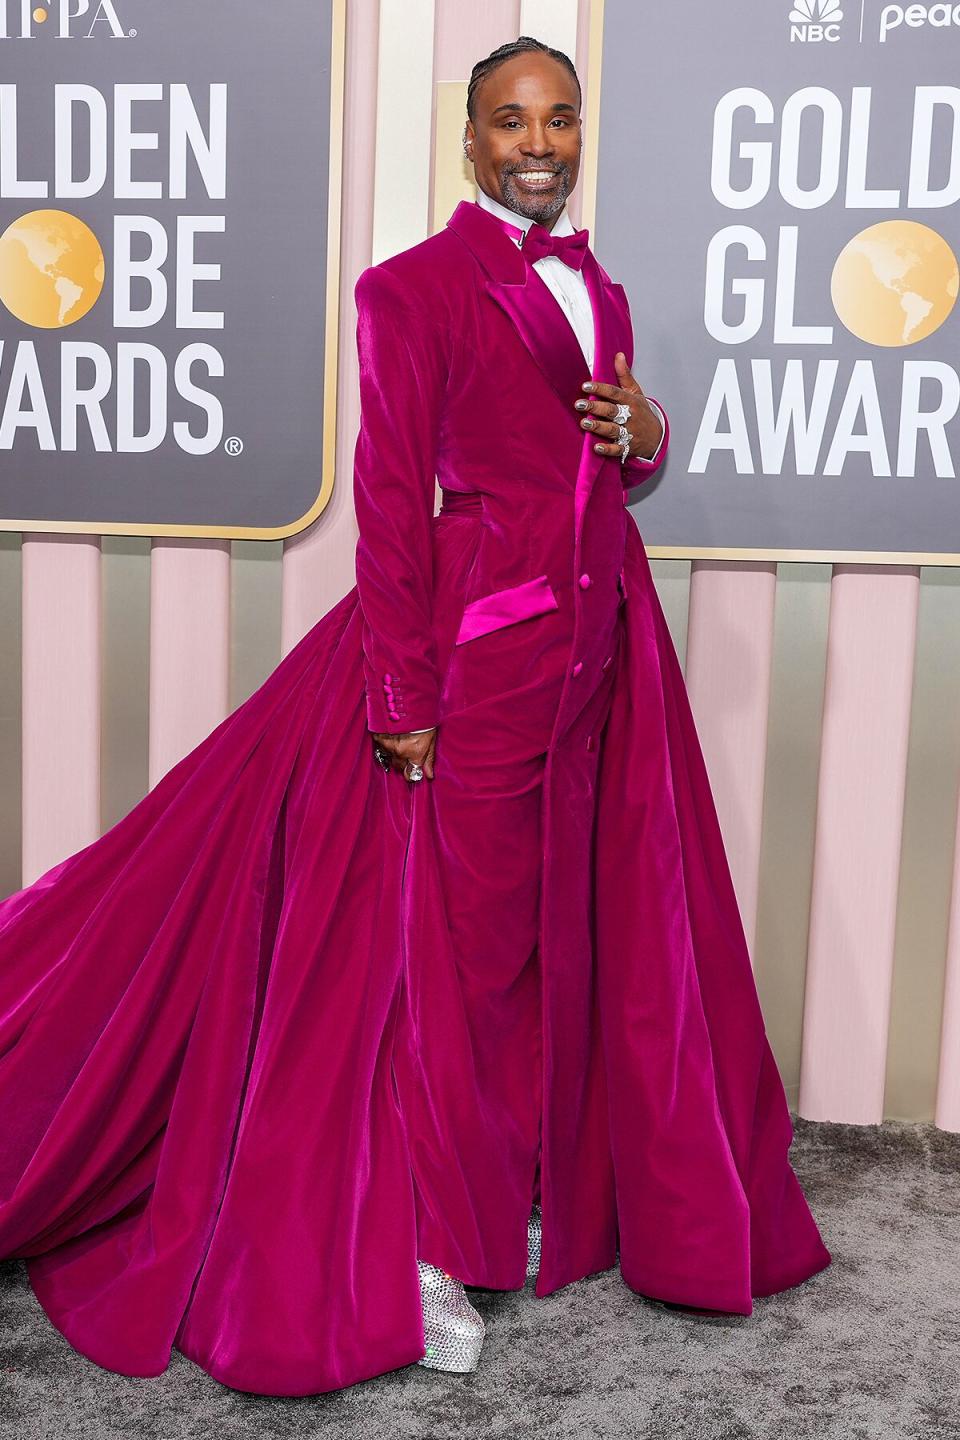 Billy Porter attends the 80th Annual Golden Globe Awards at The Beverly Hilton on January 10, 2023 in Beverly Hills, California.